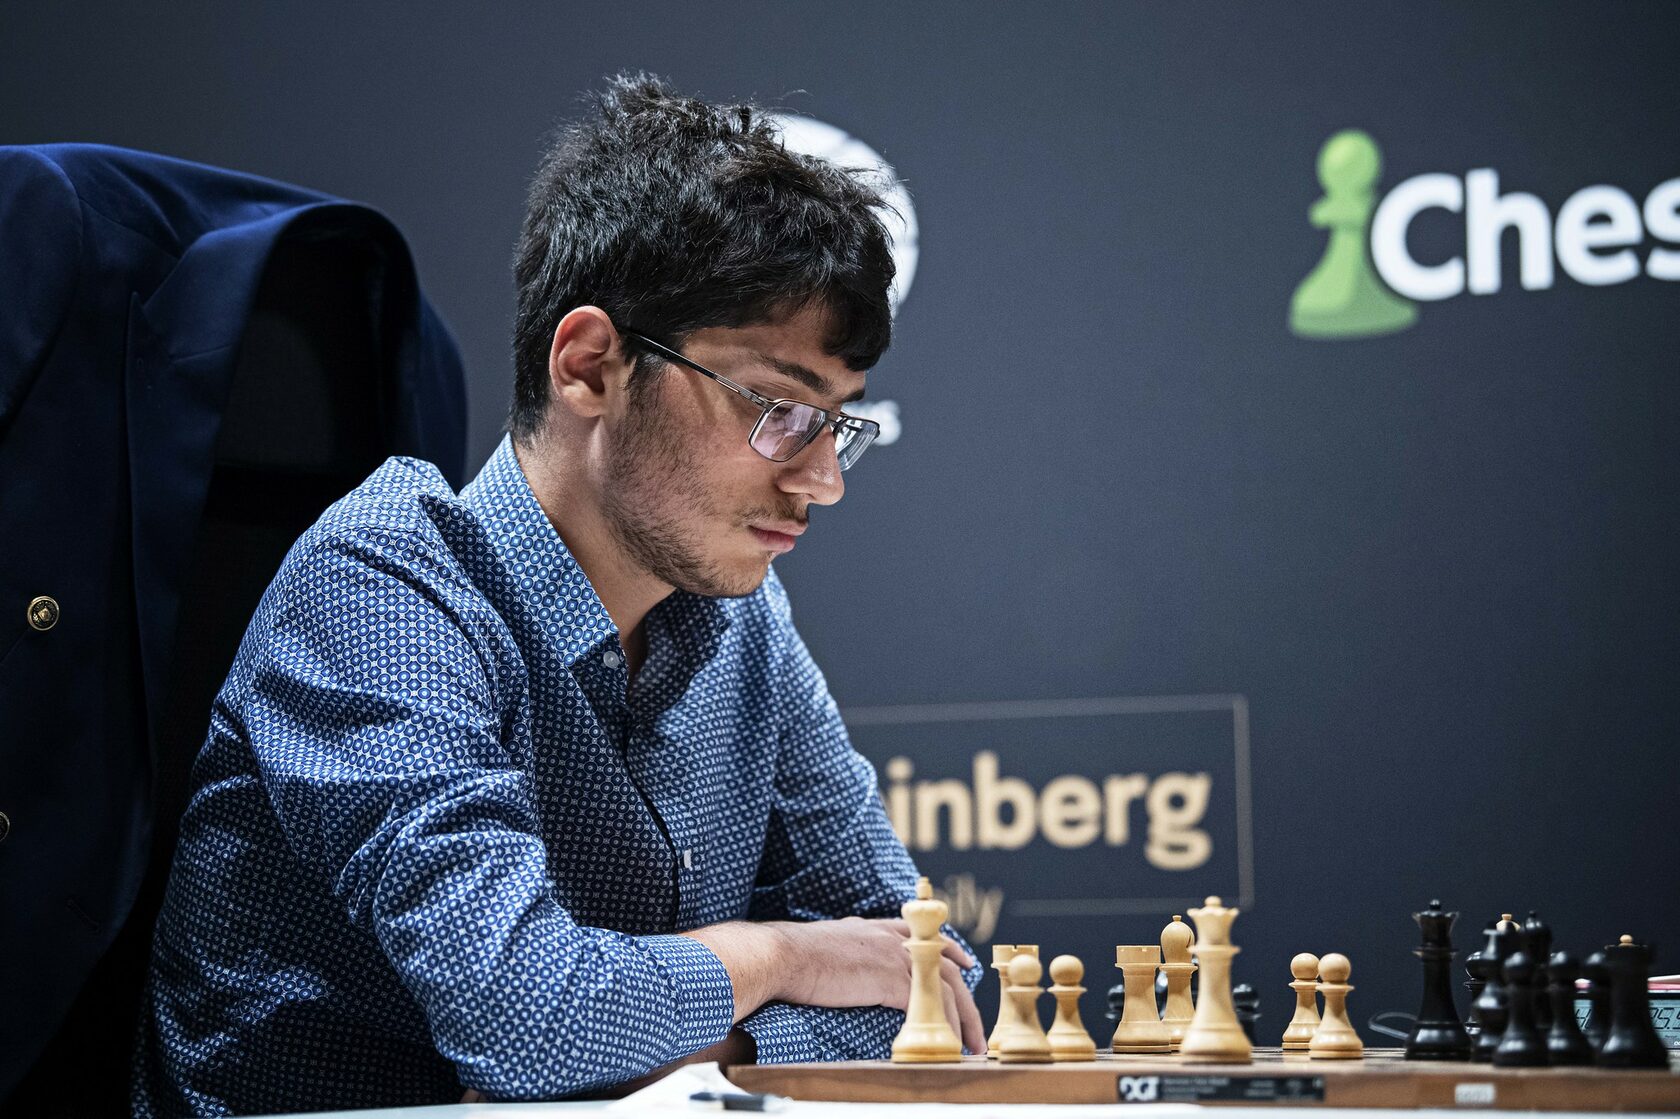 Ding Liren scores a second consecutive win, this time against